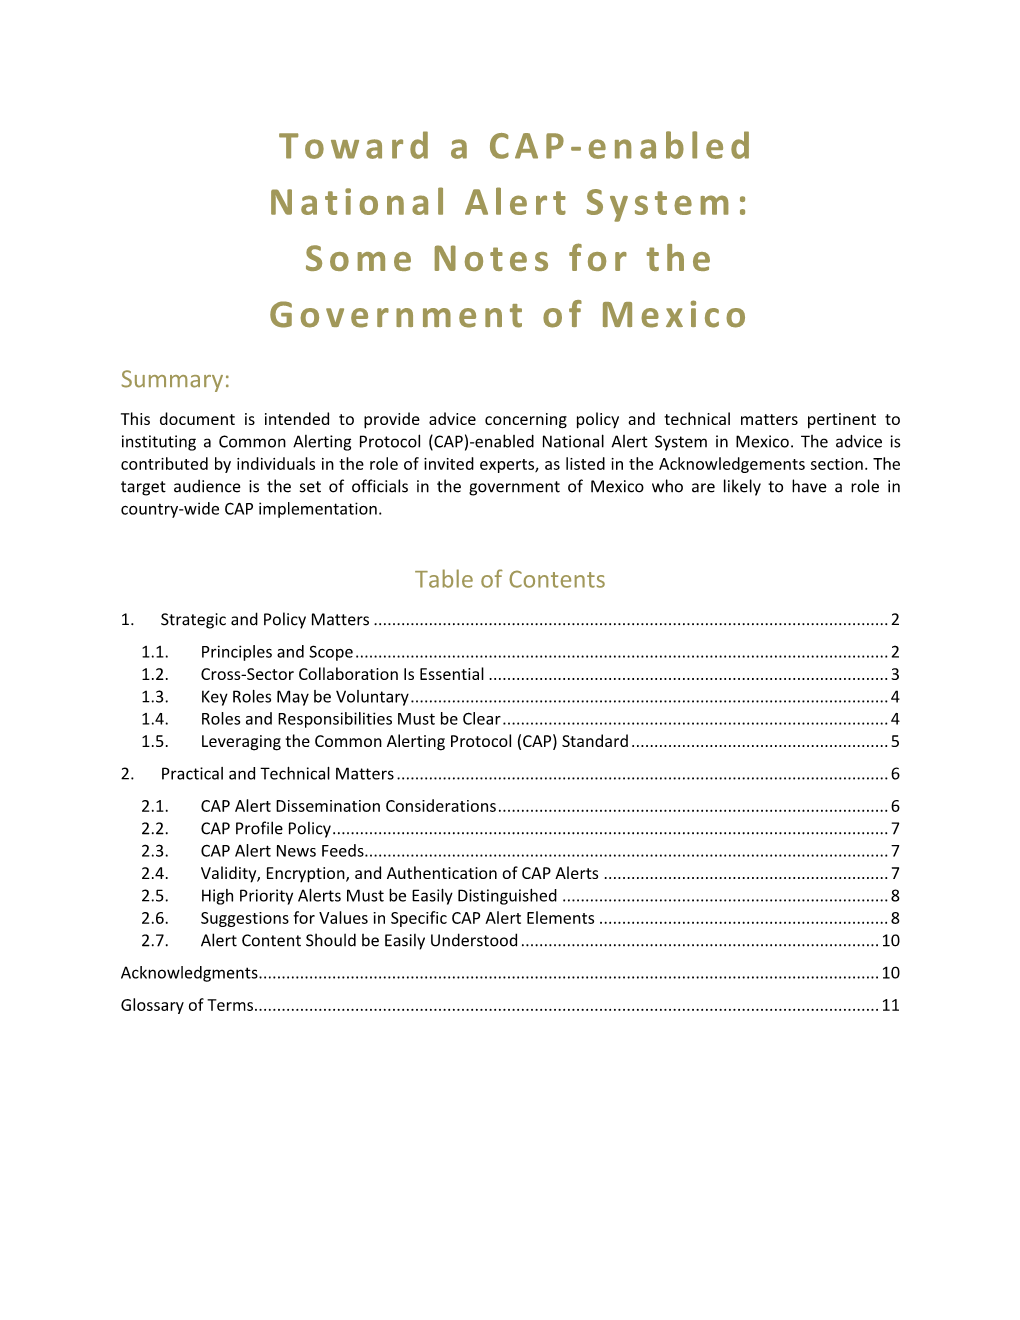 Toward a CAP-Enabled National Alert System : Some Notes for the Government of Mexico